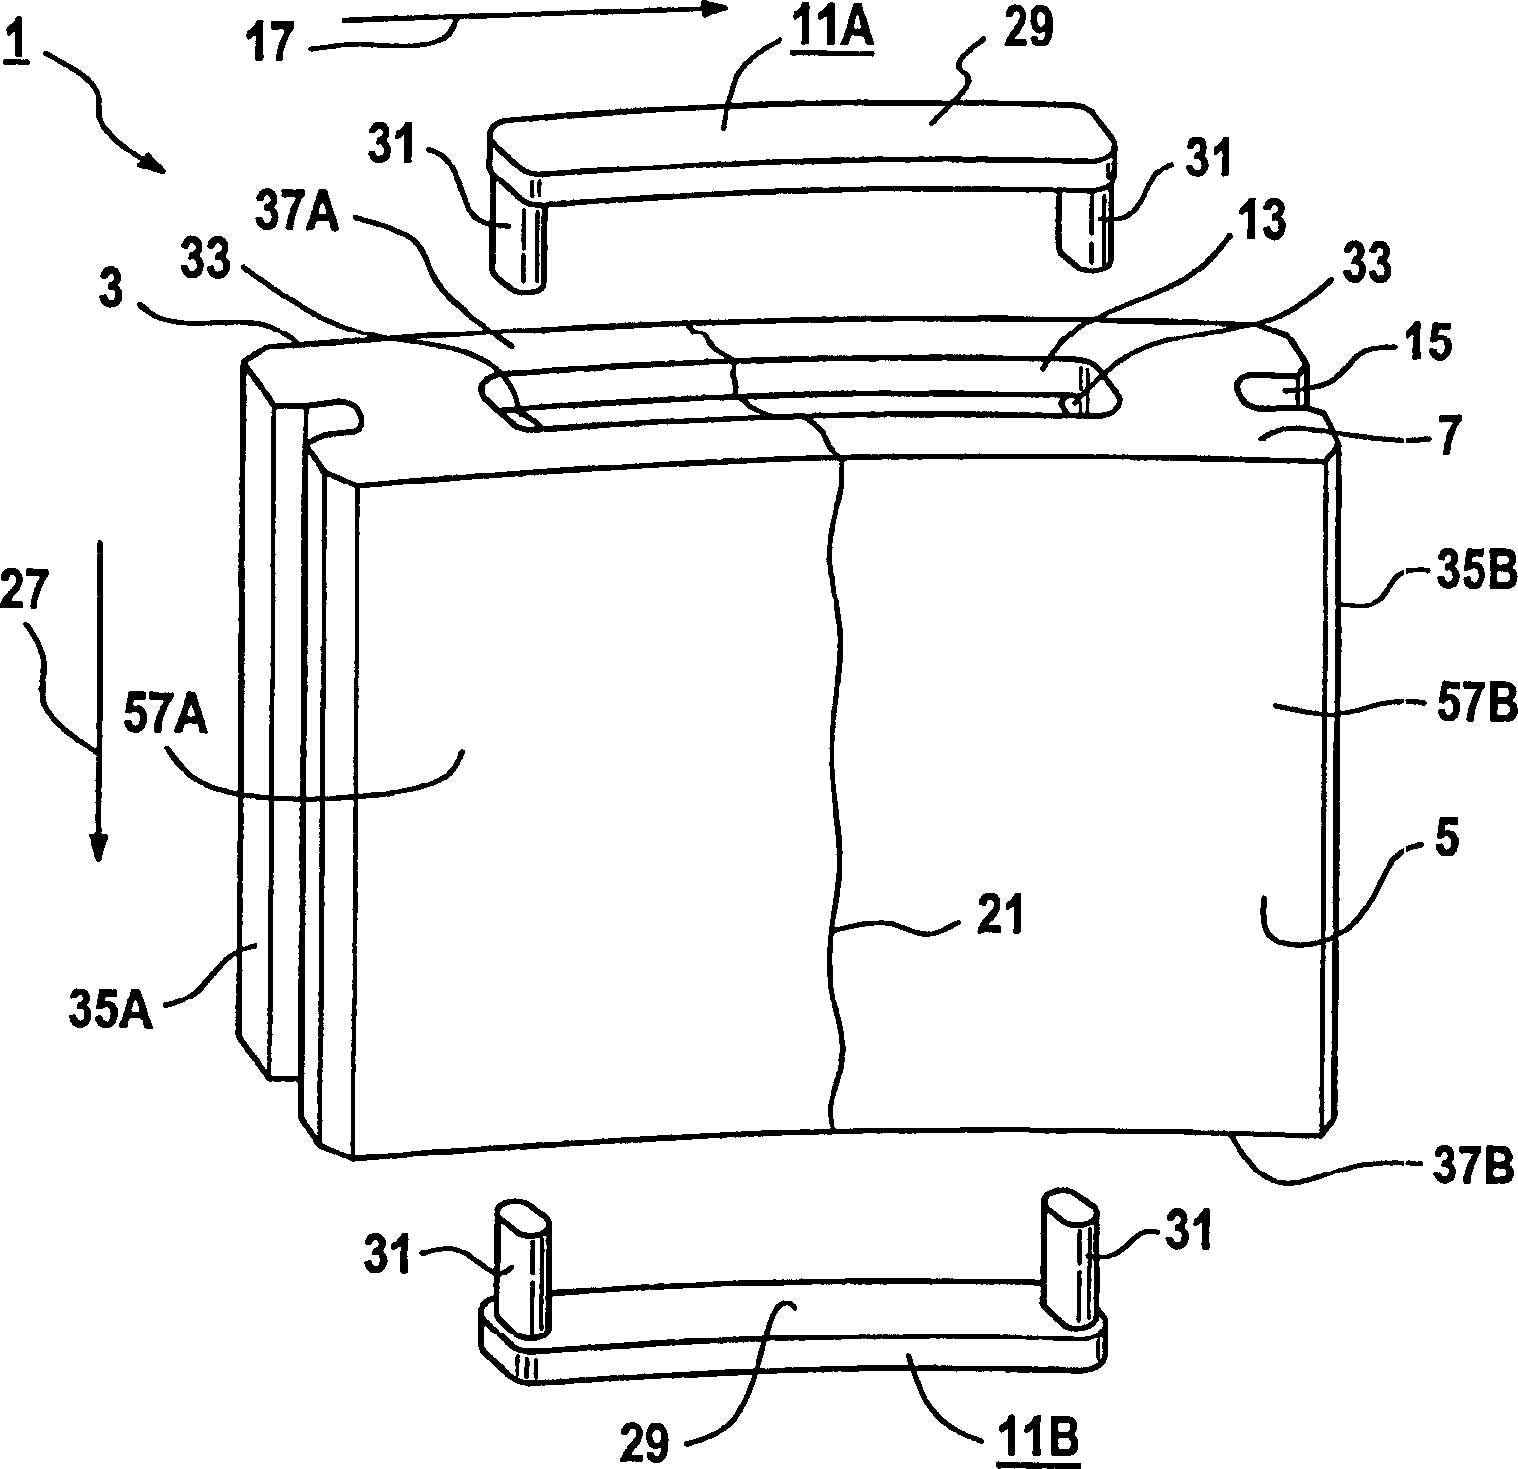 Thermal lump and its application in combustion chamber